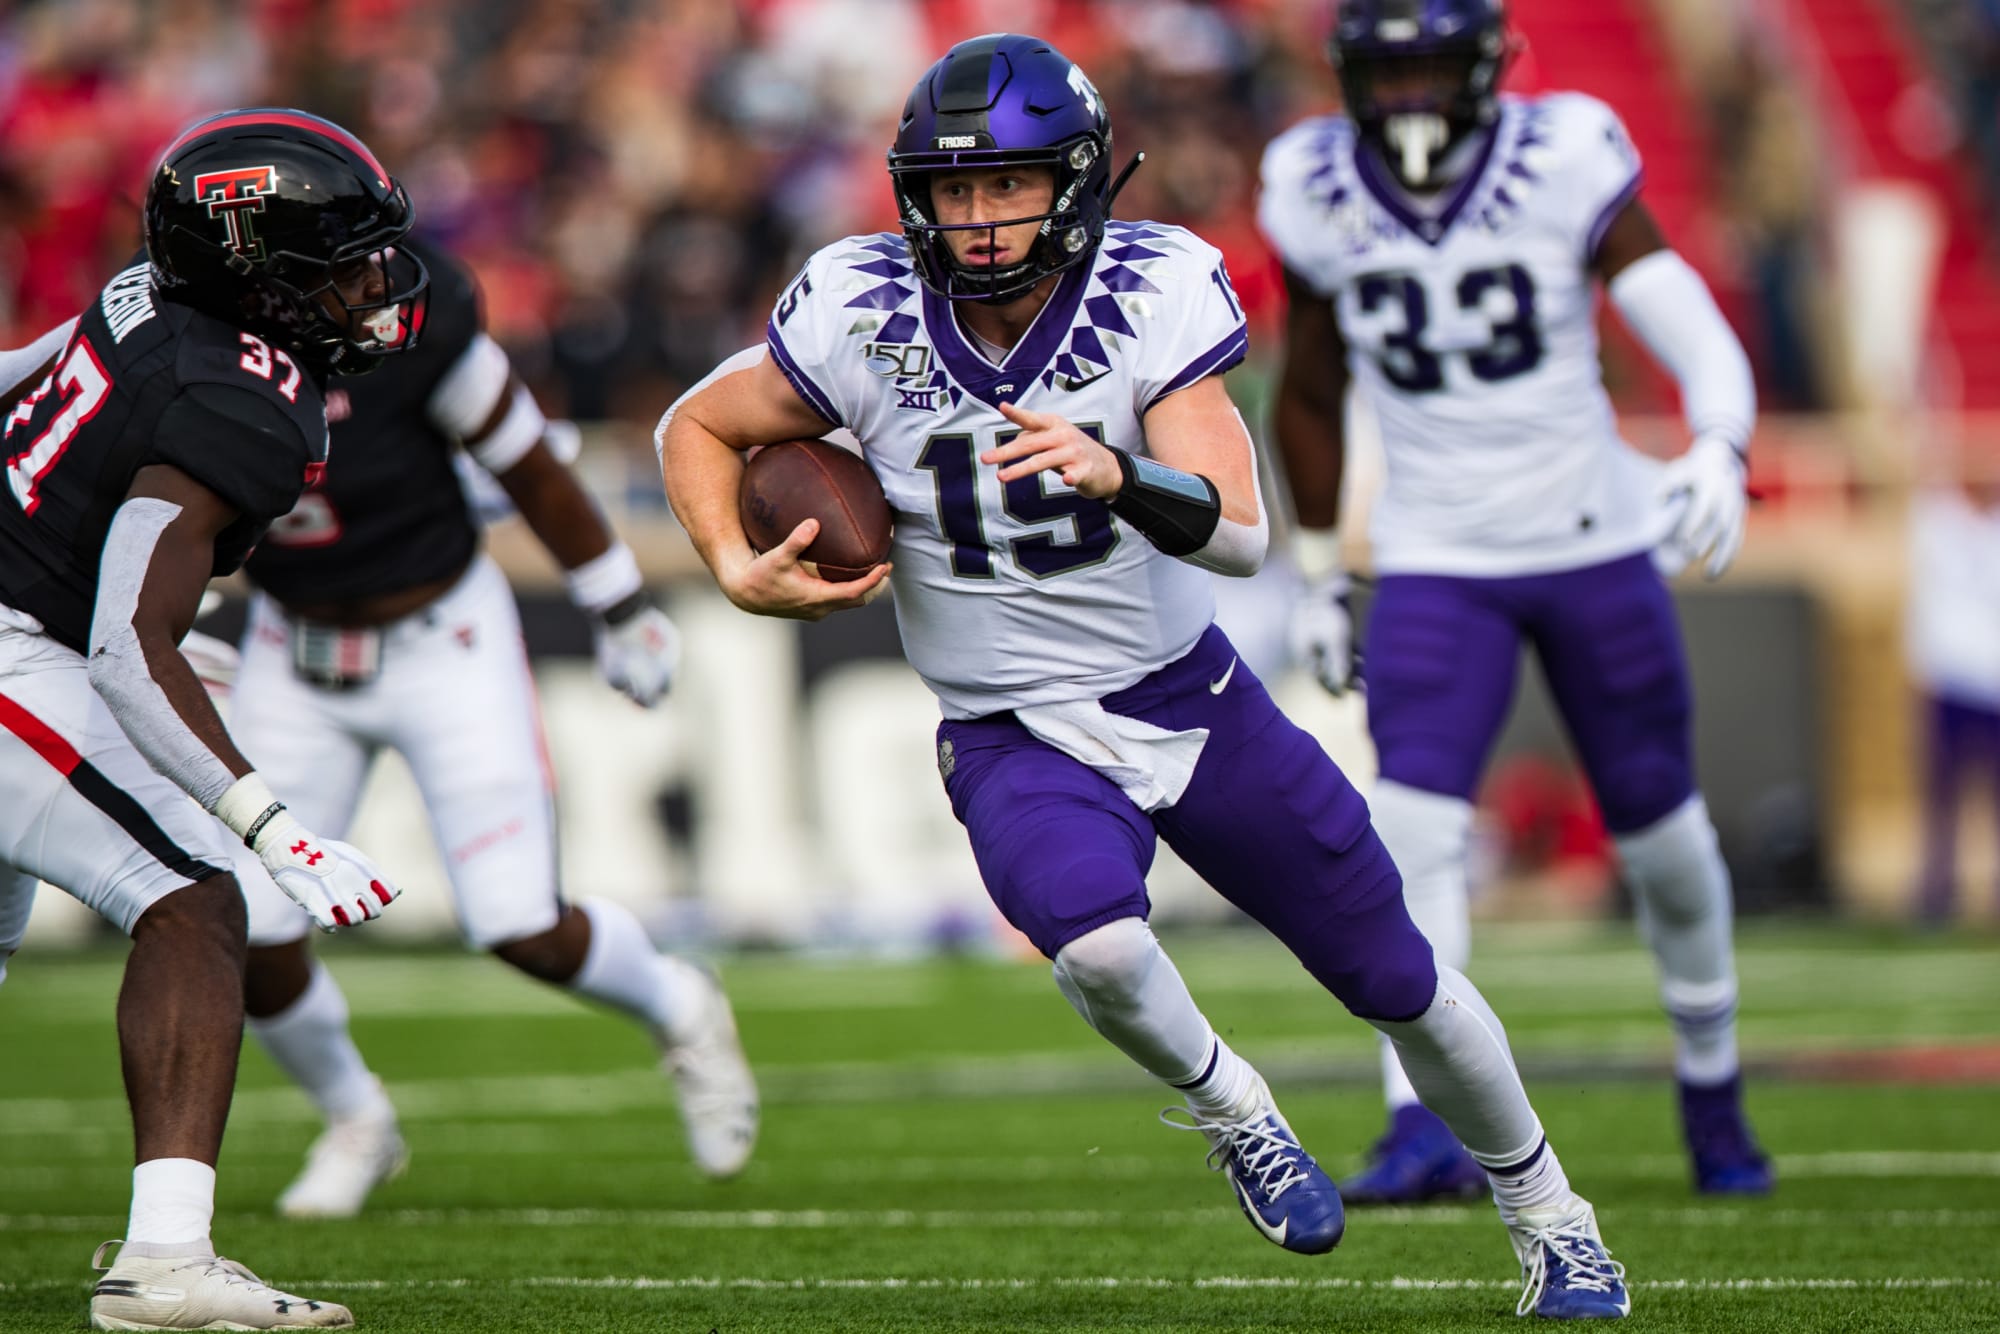 After success with transfer portal at SMU Sonny Dykes faces different QB  situation at TCU